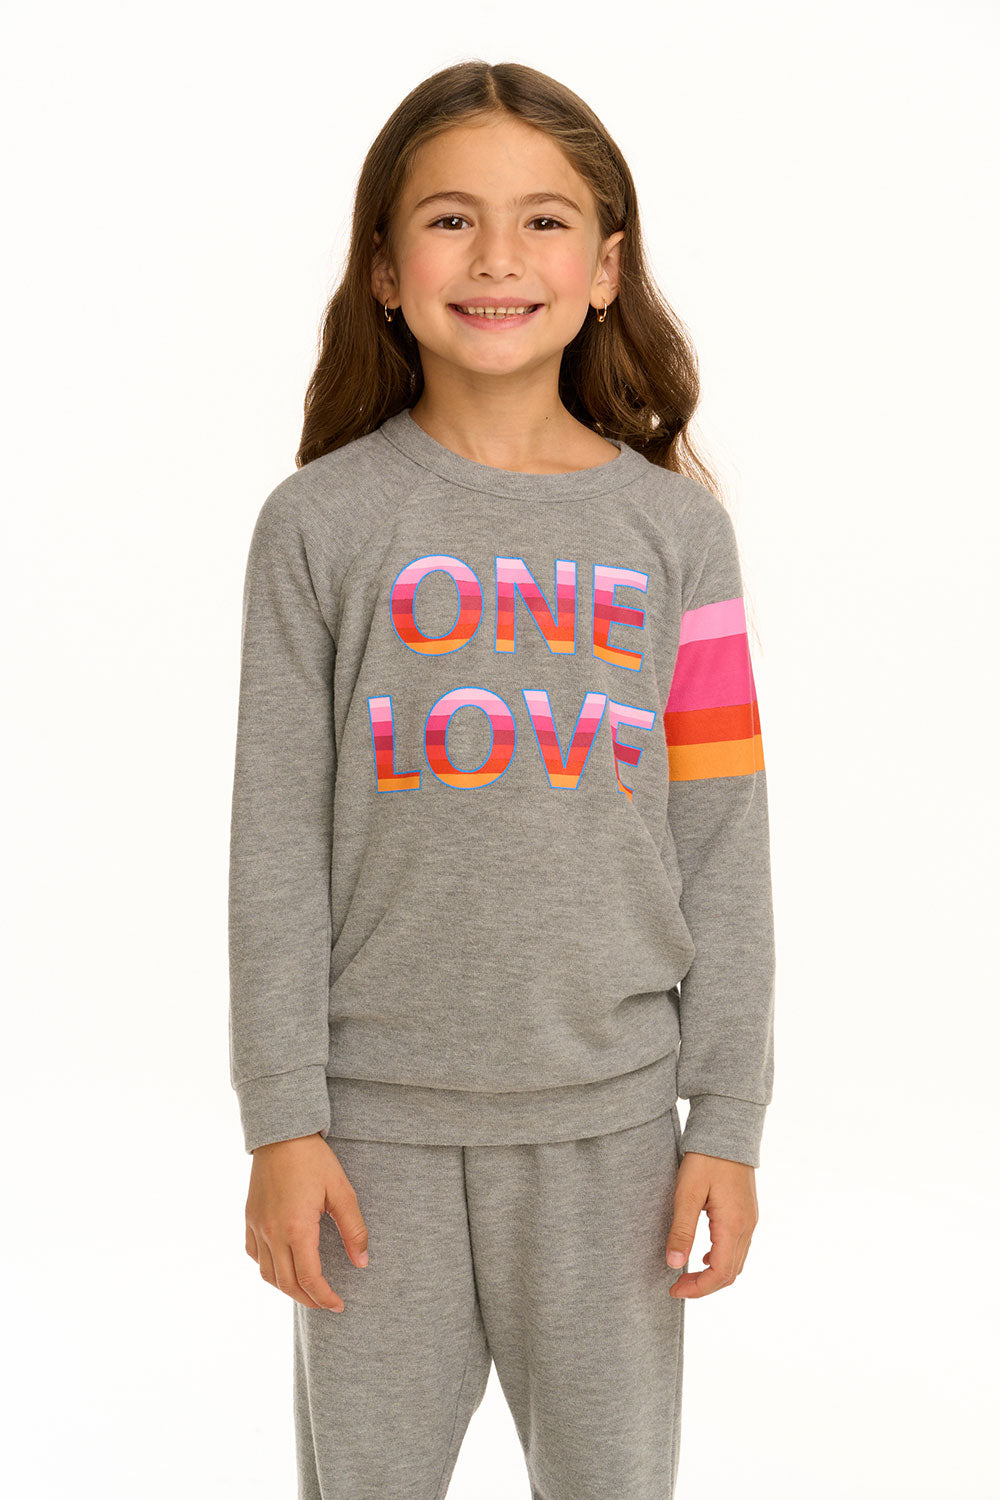 One Love Pullover GIRLS chaserbrand